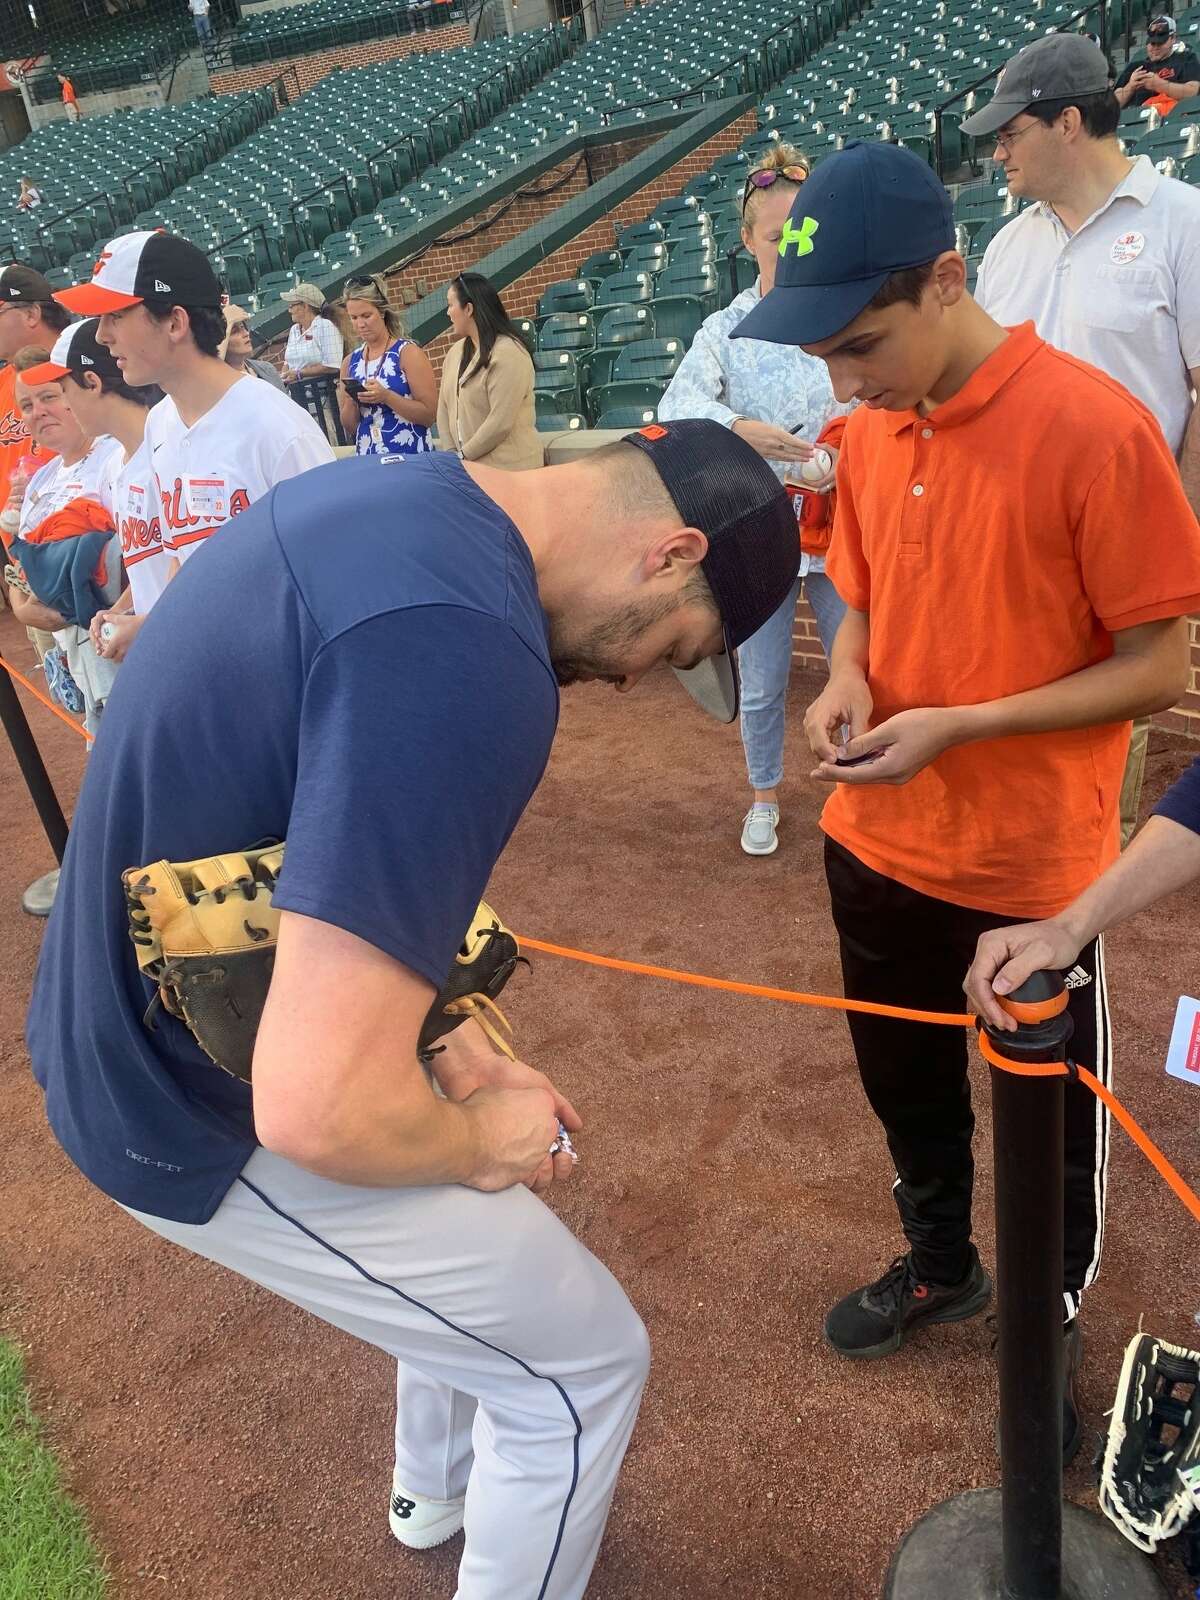 Trey Mancini's cancer recovery process includes an adorable puppy